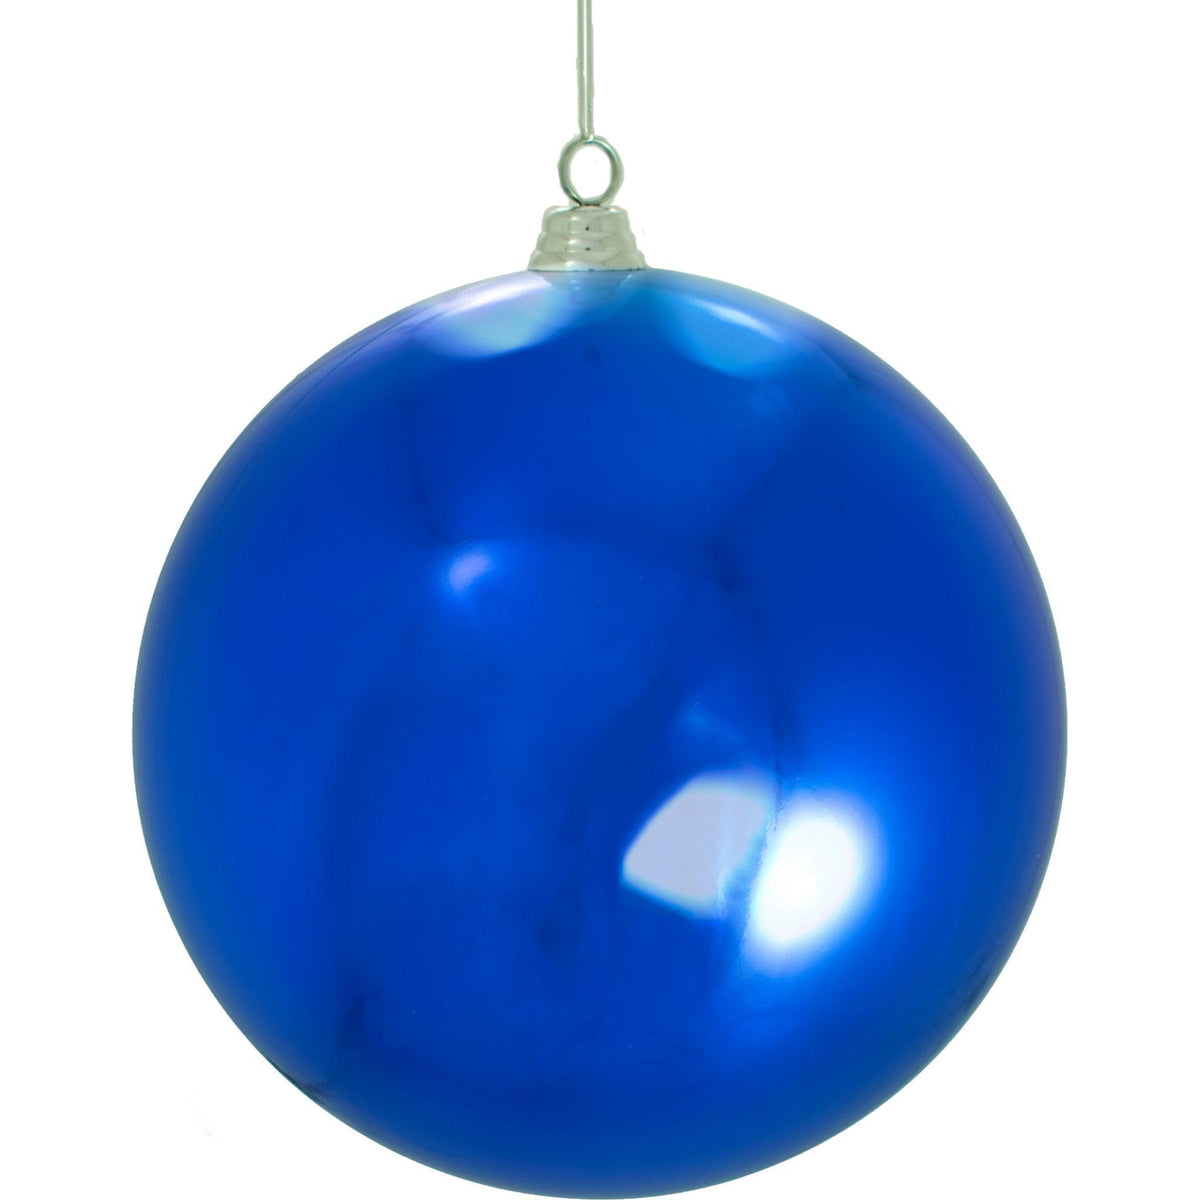 Shiny Blue colored ball ornaments come with a silver cap and hanging string